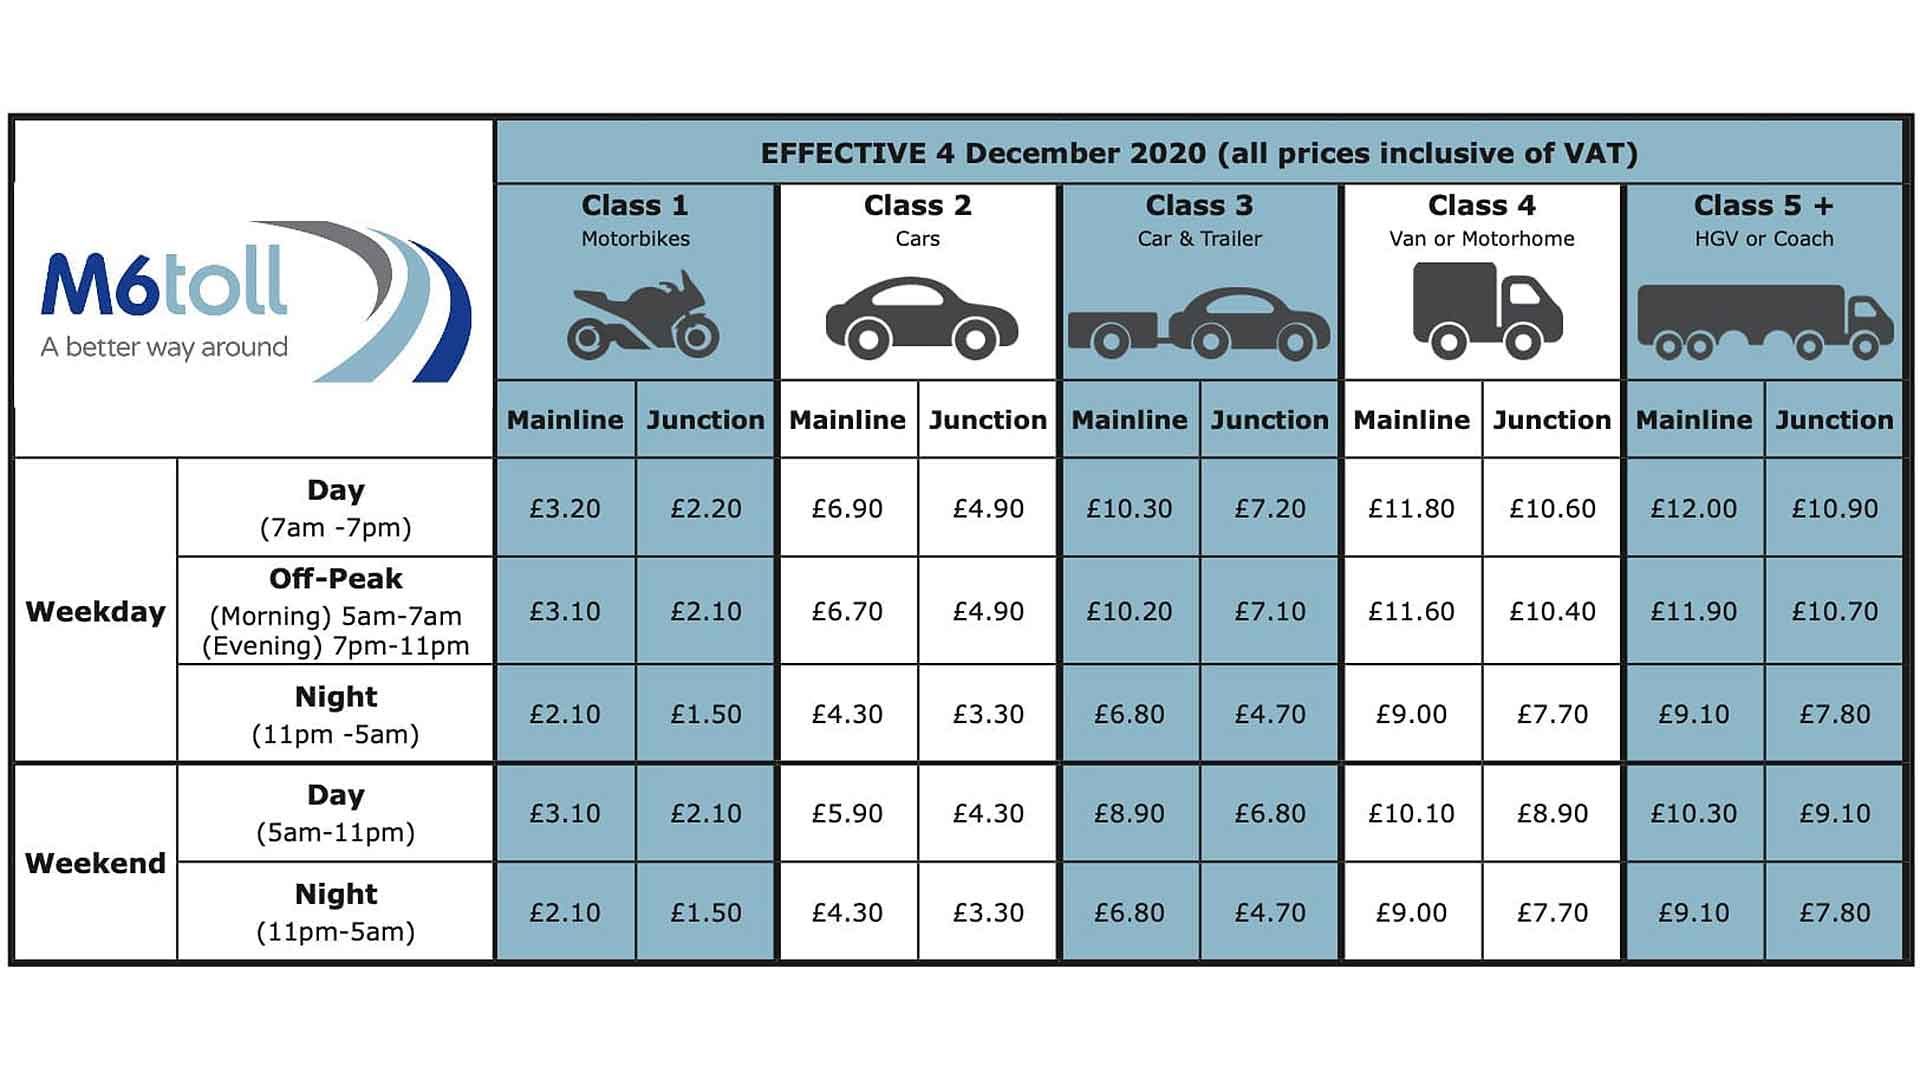 M6 Toll pricing table from 4 December 2020